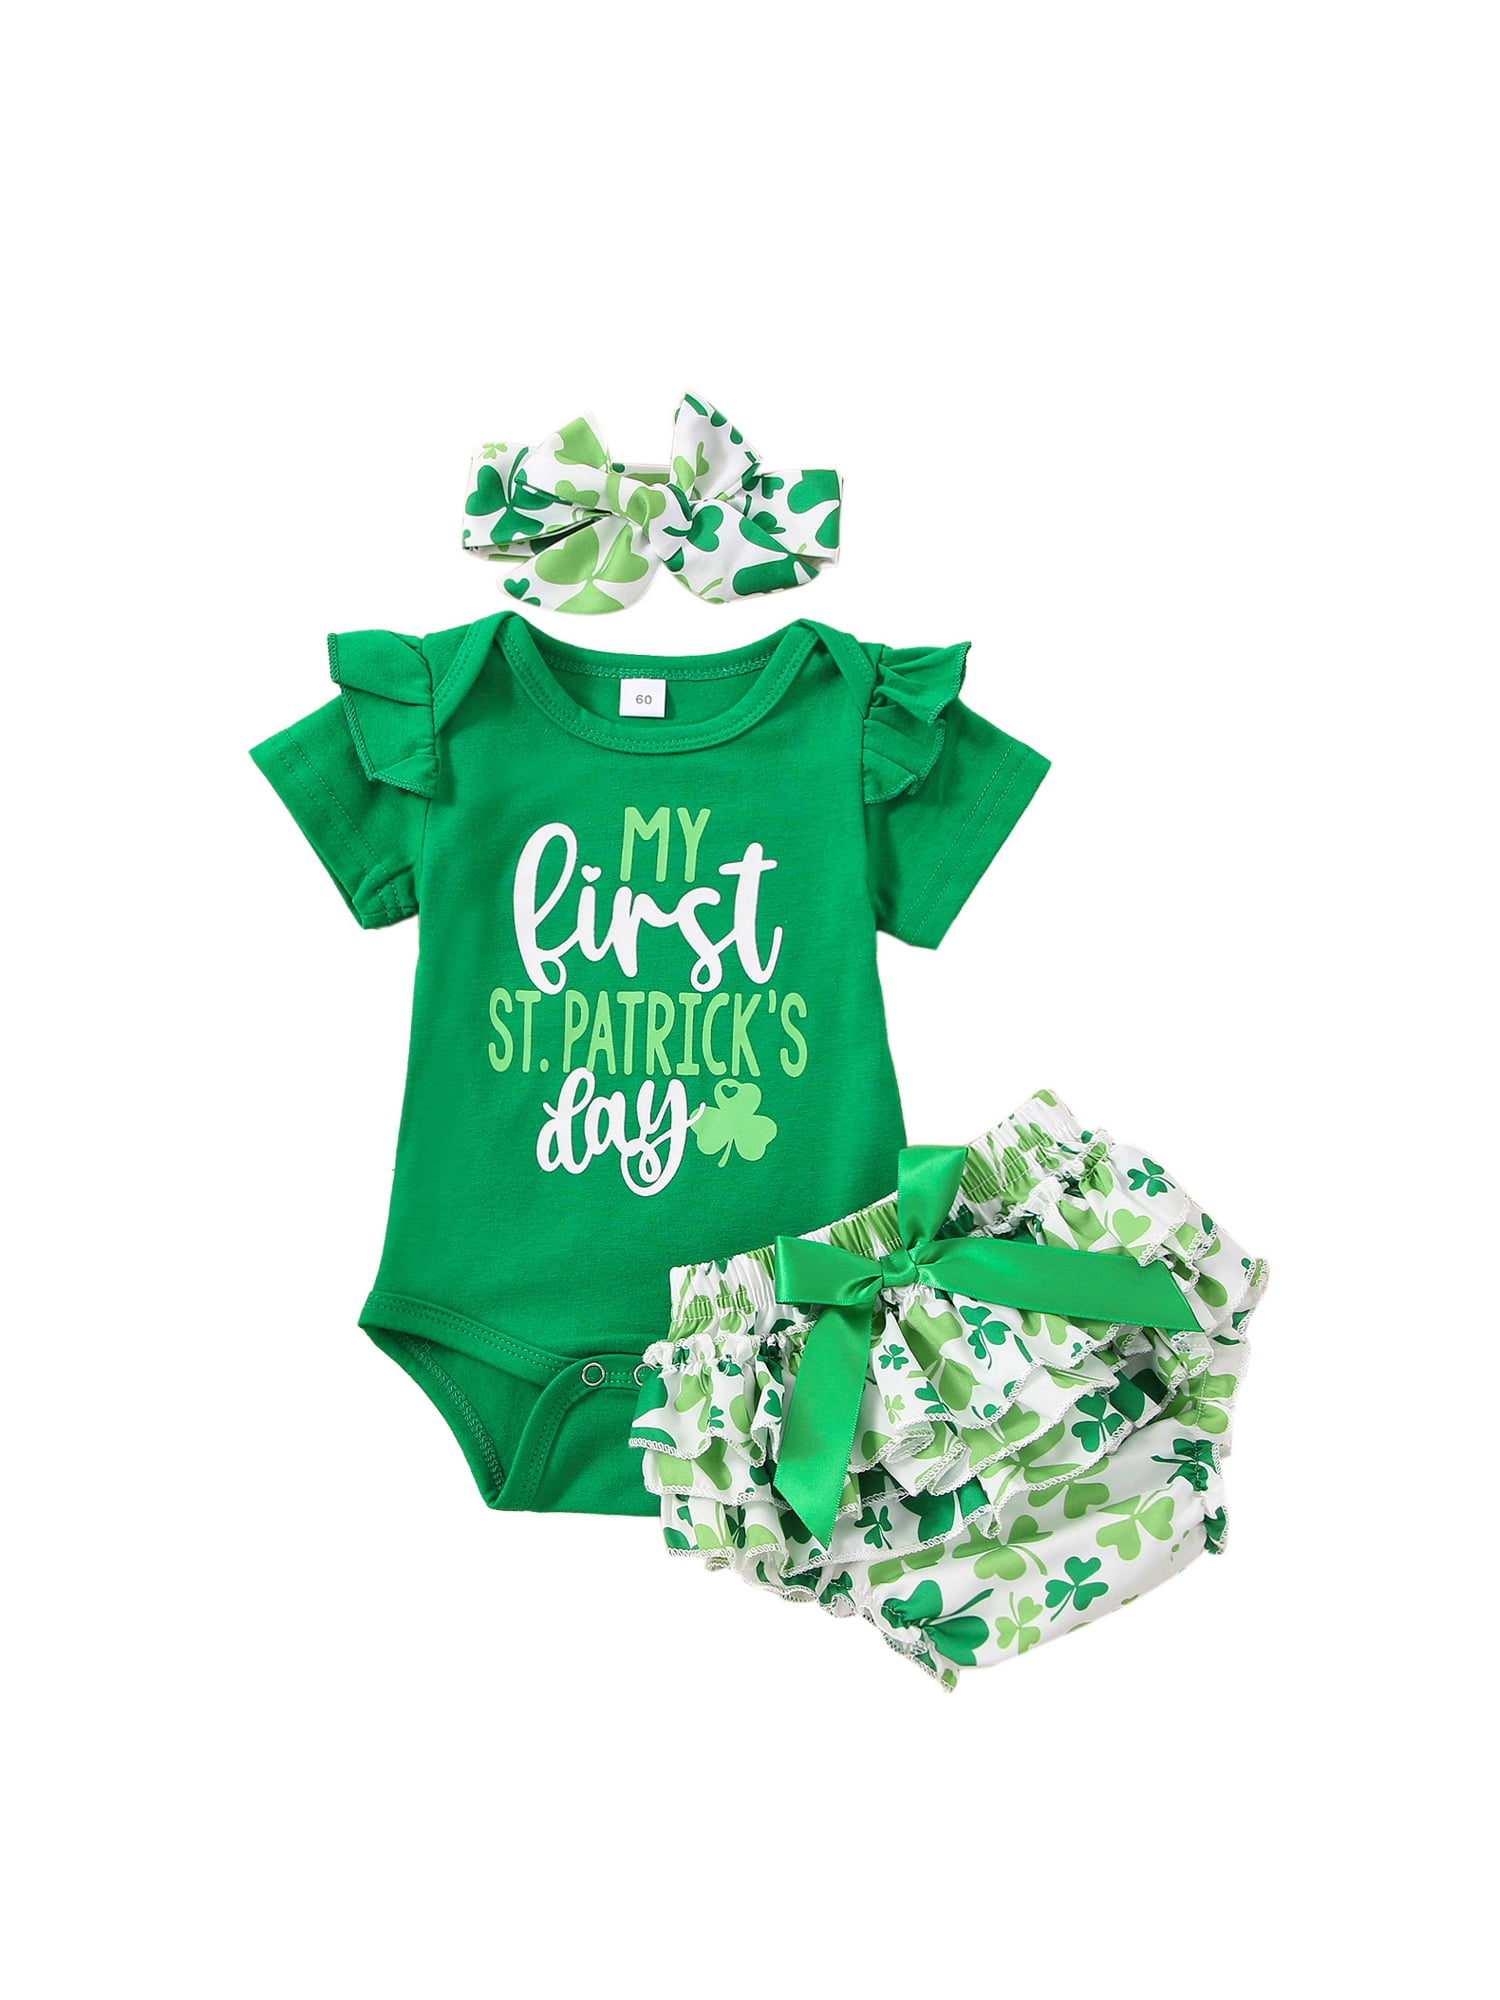 Patricks Day Outfit Toddler Baby Girl Shamrocks T-Shirt Tops Suspender Skirts Overall Clothes Set St 